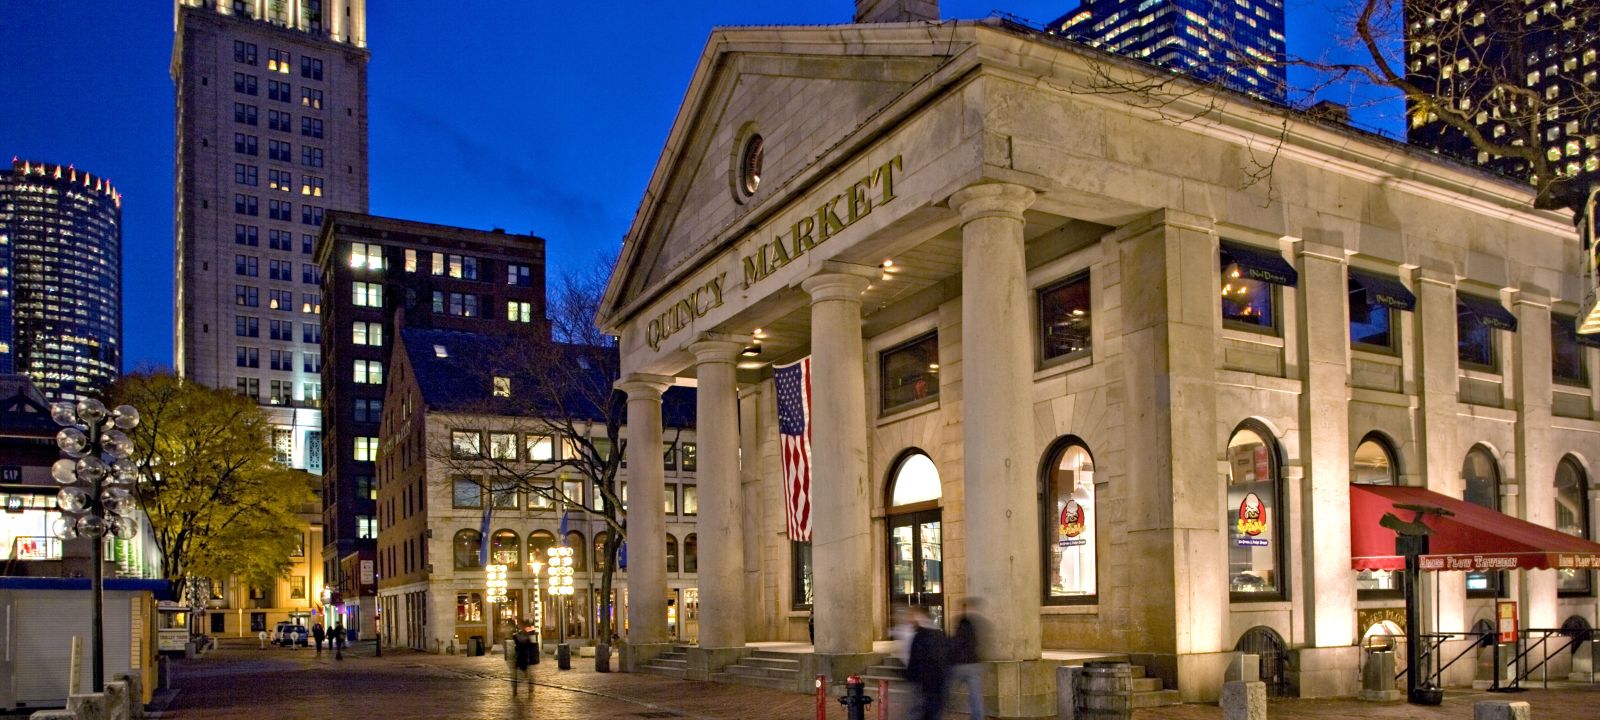 Quincy Market at night